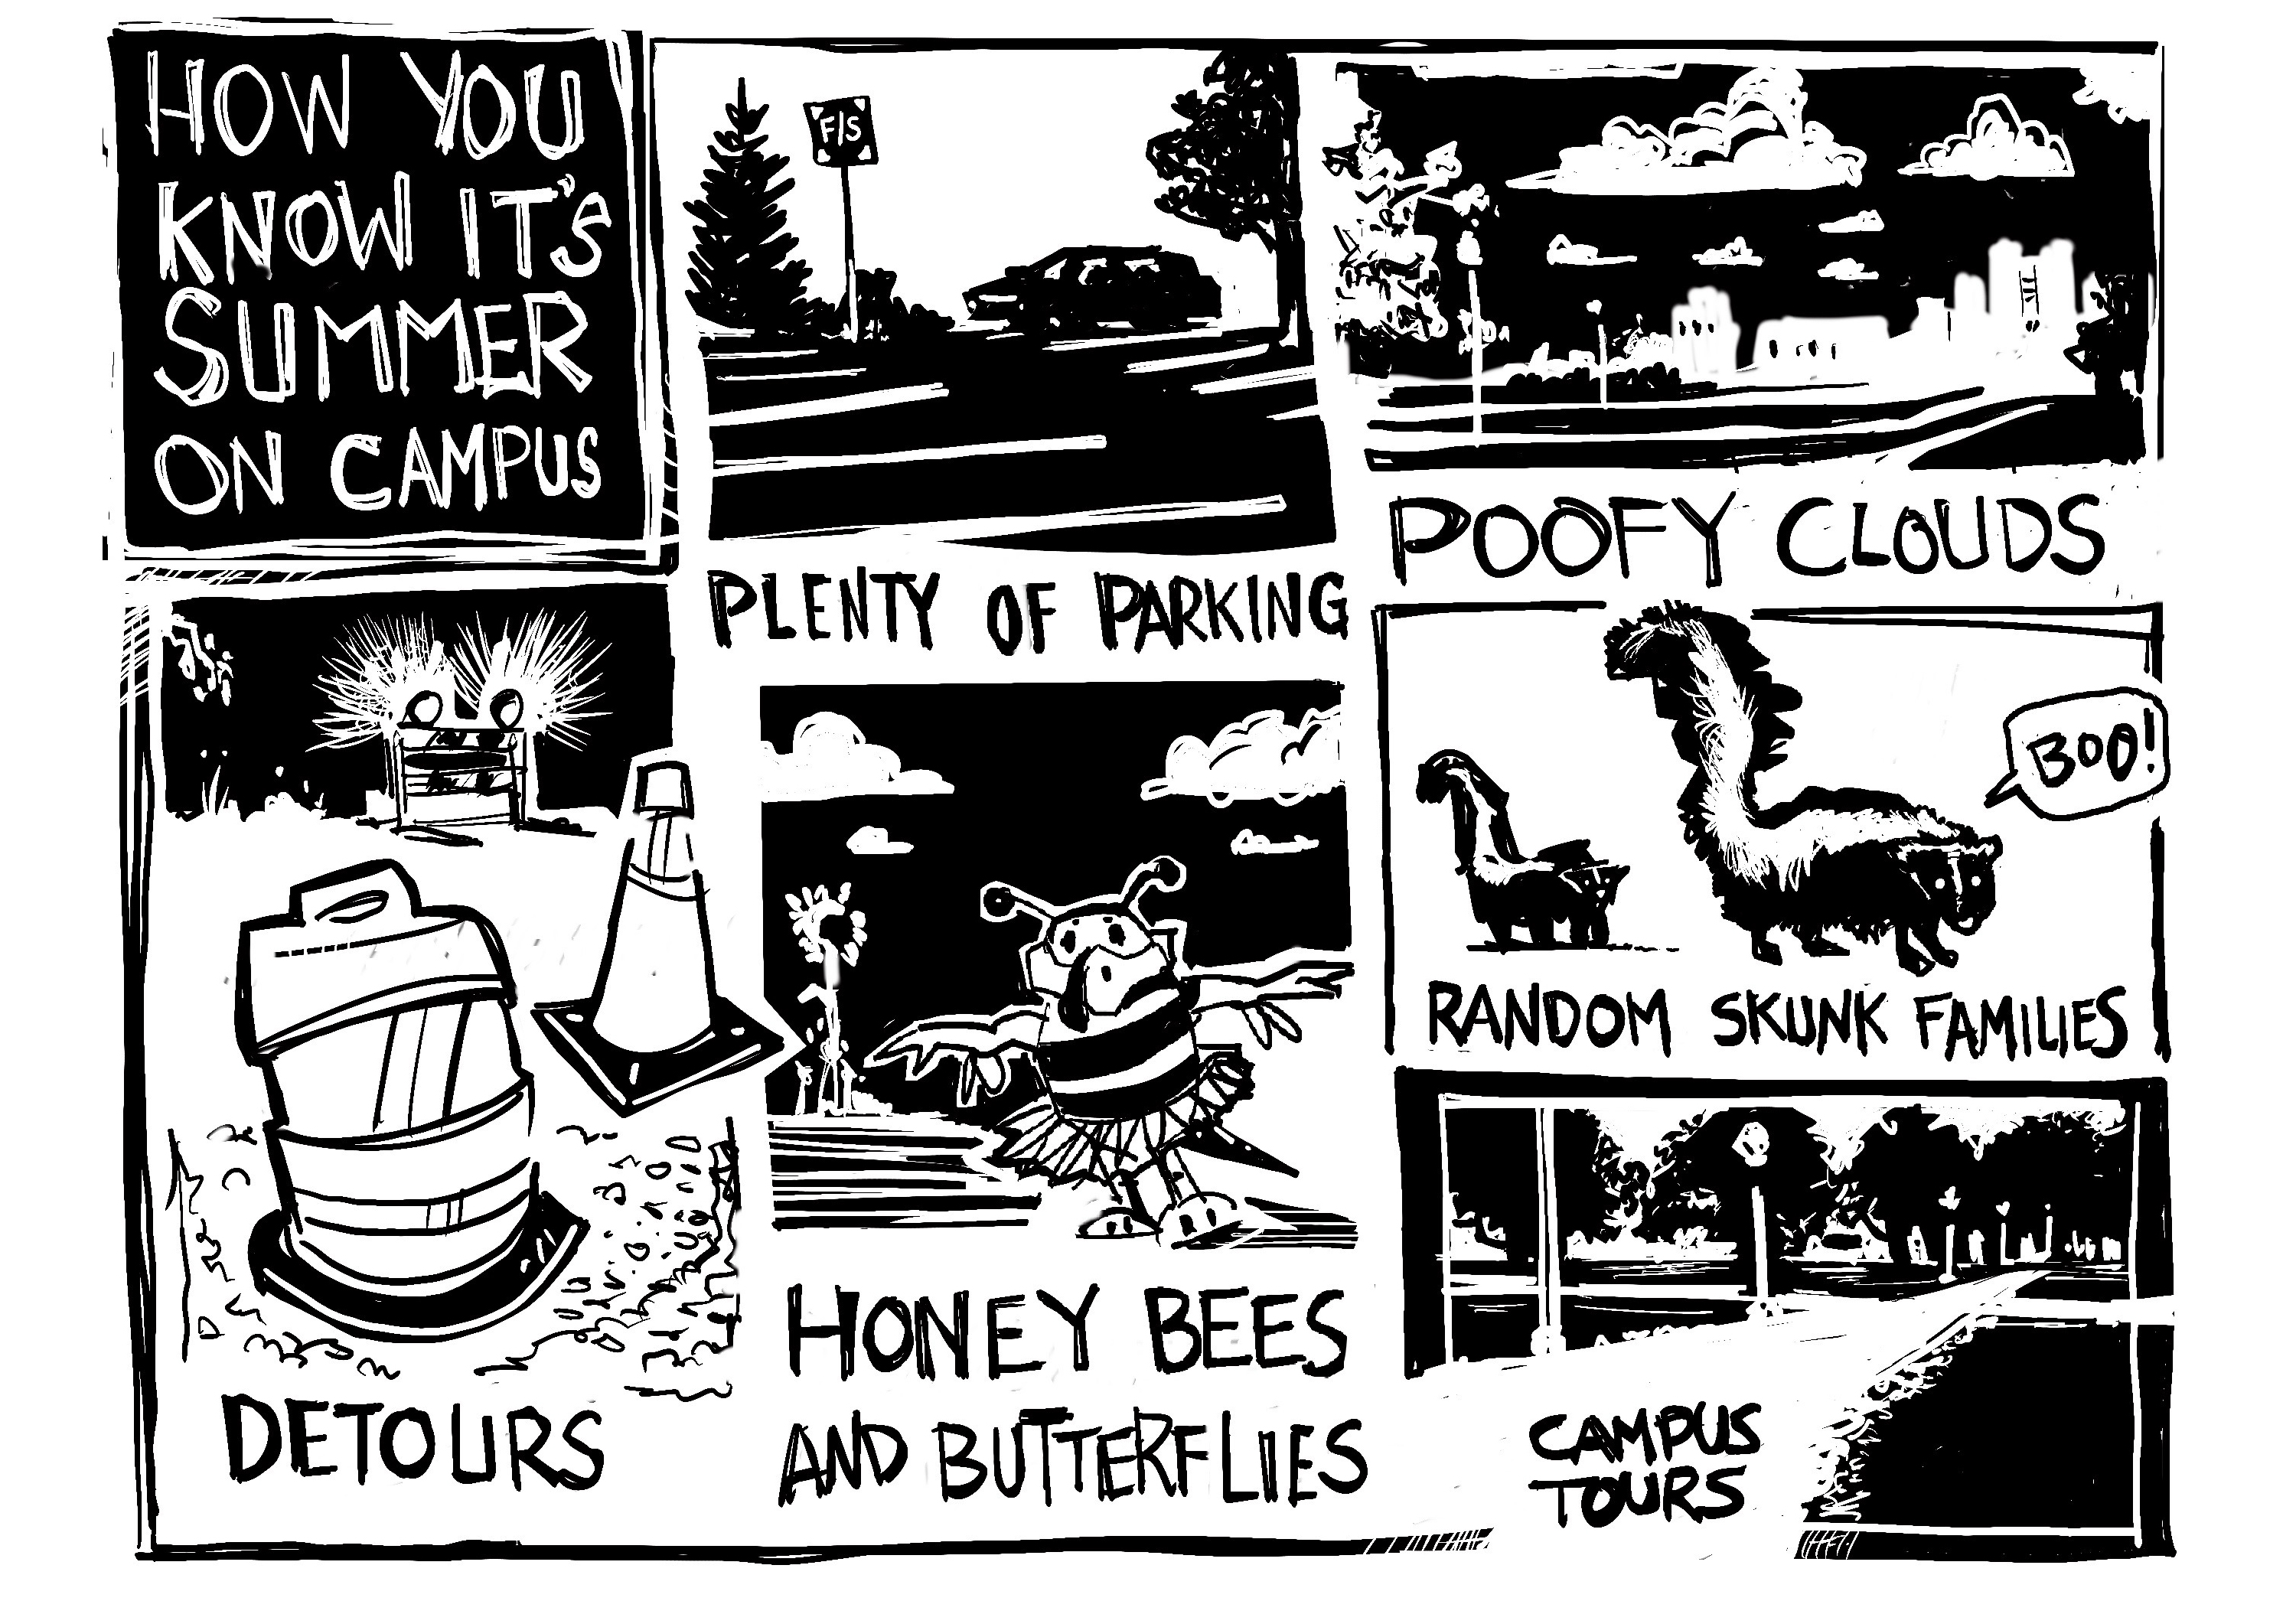 Digital series of panels showing campus life during the summer. Detours. Plenty of Parking. Honey bees and butterflies. Poofy clouds. Random Skunk Families. Campus Tours